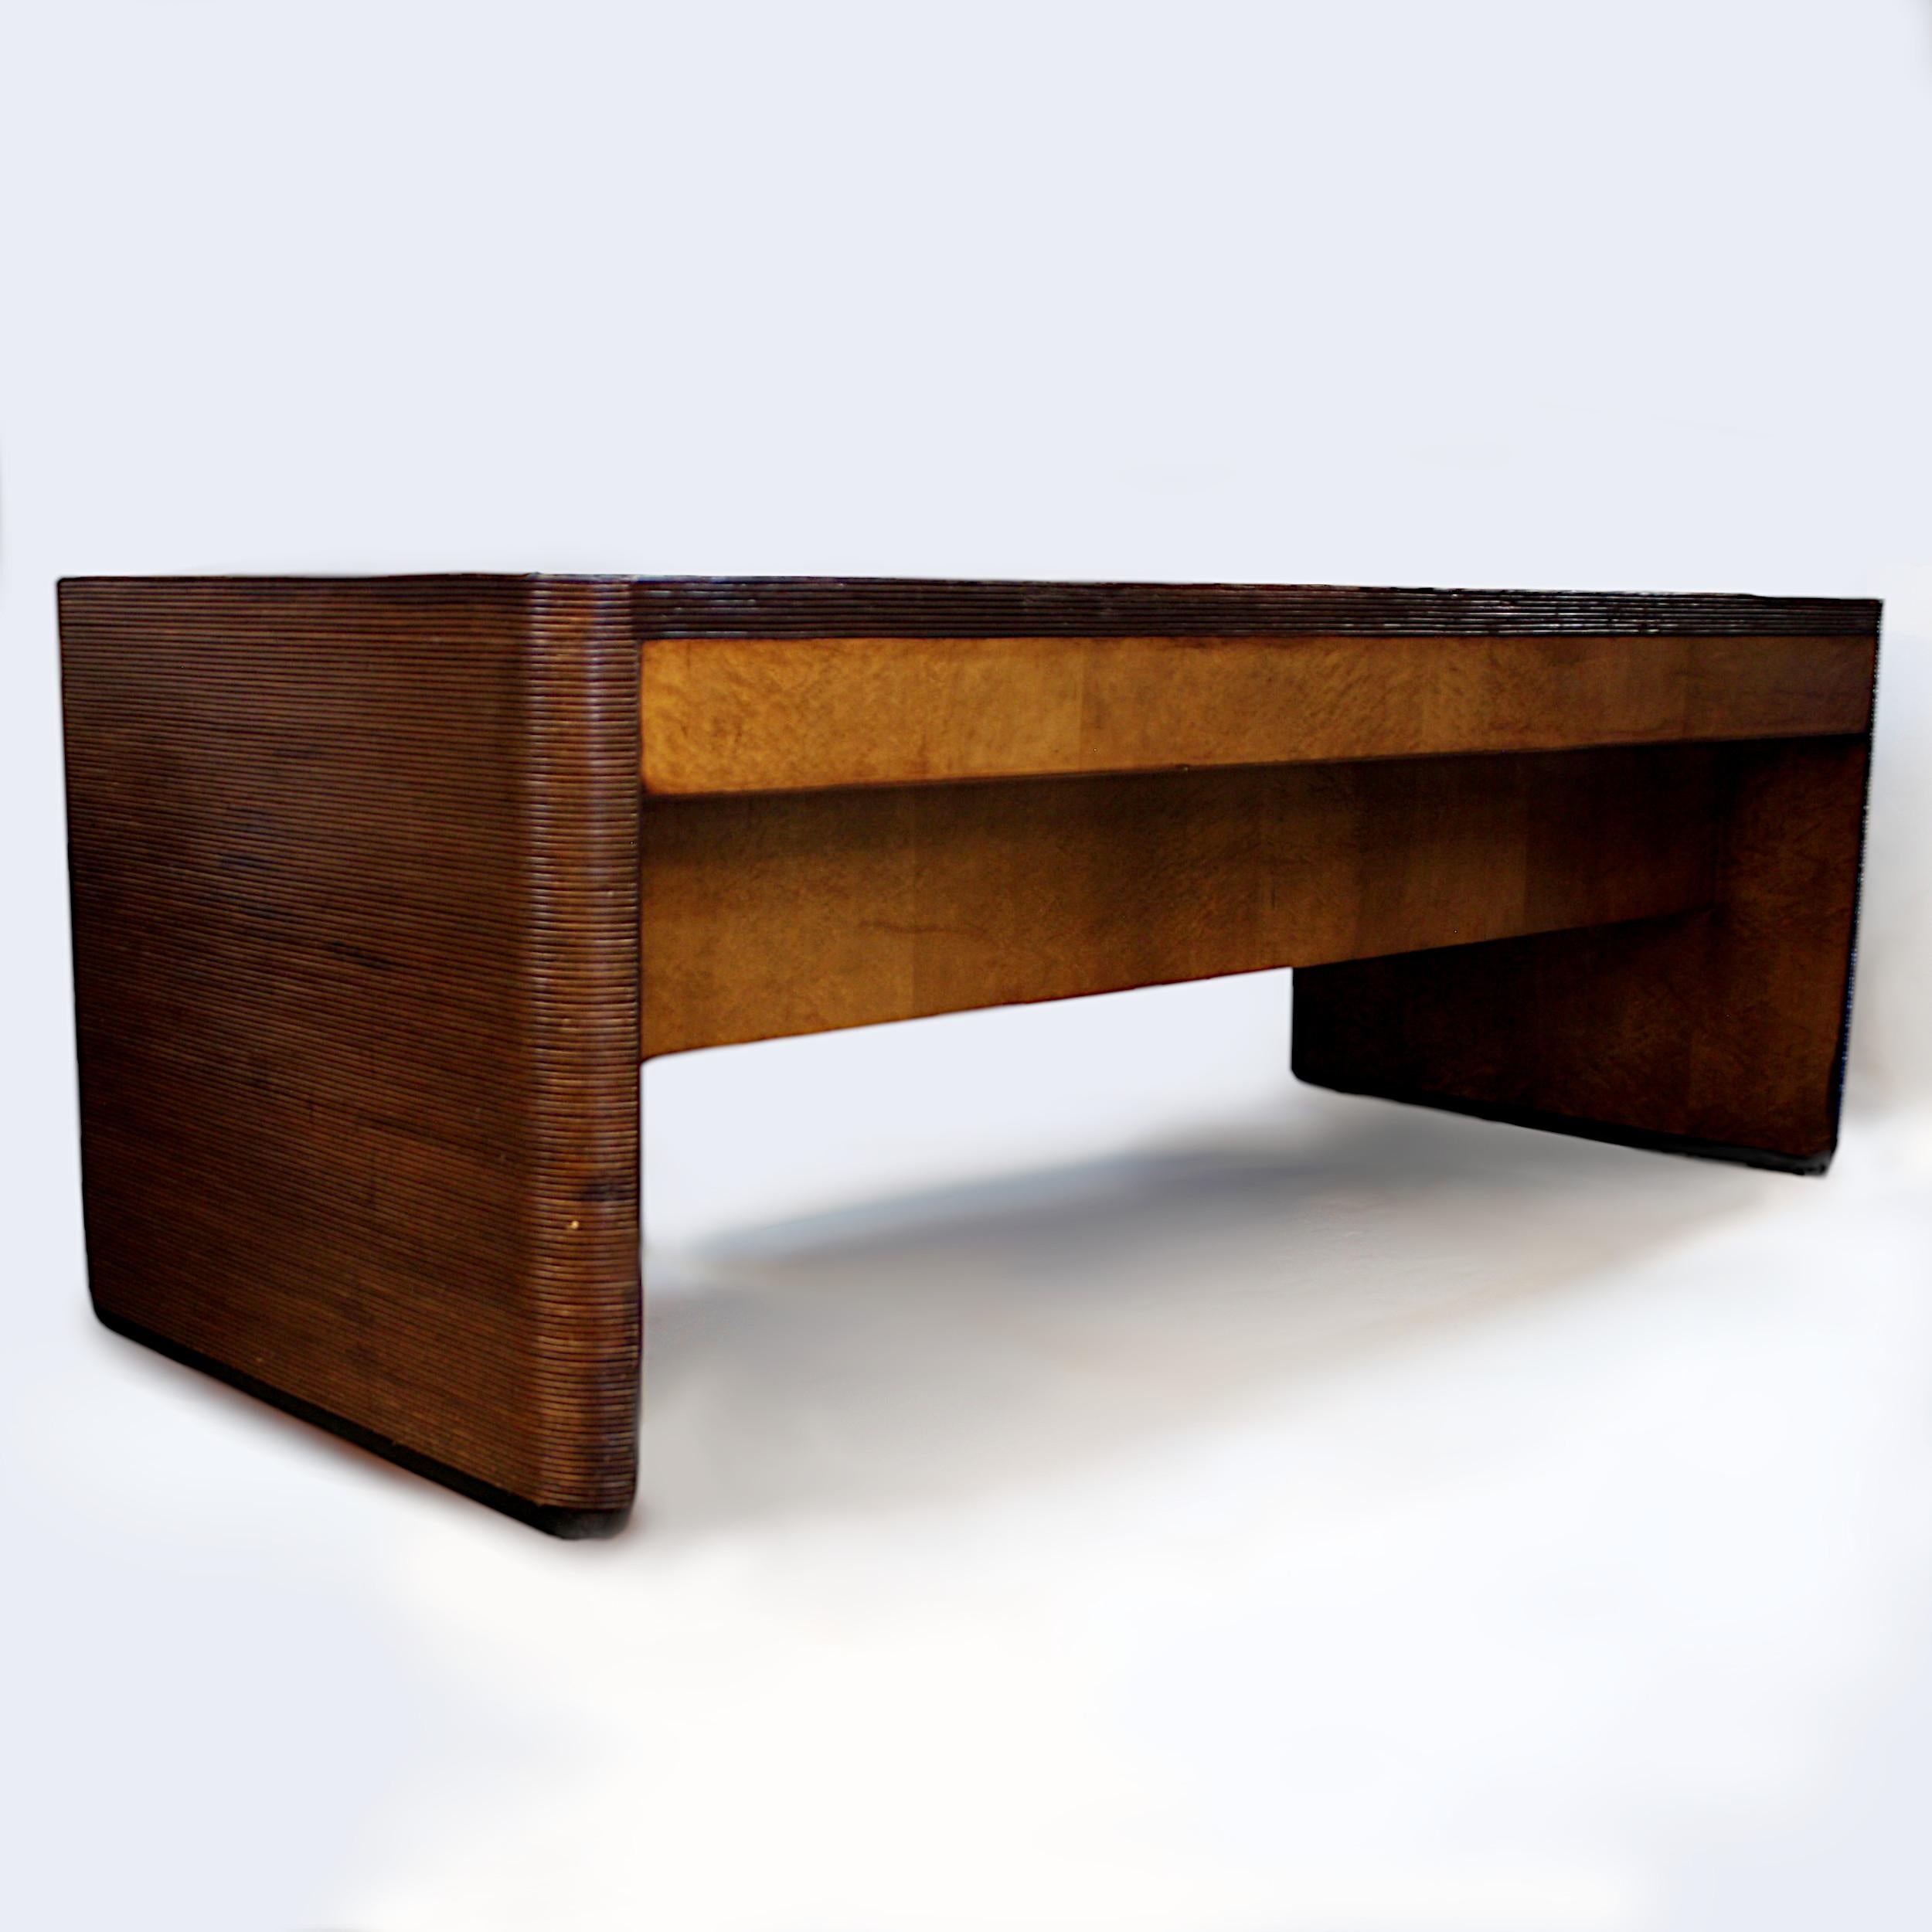 Late 20th Century Monumental Mid-Century Modern Rattan Executive Desk by Karl Rausch for Baker